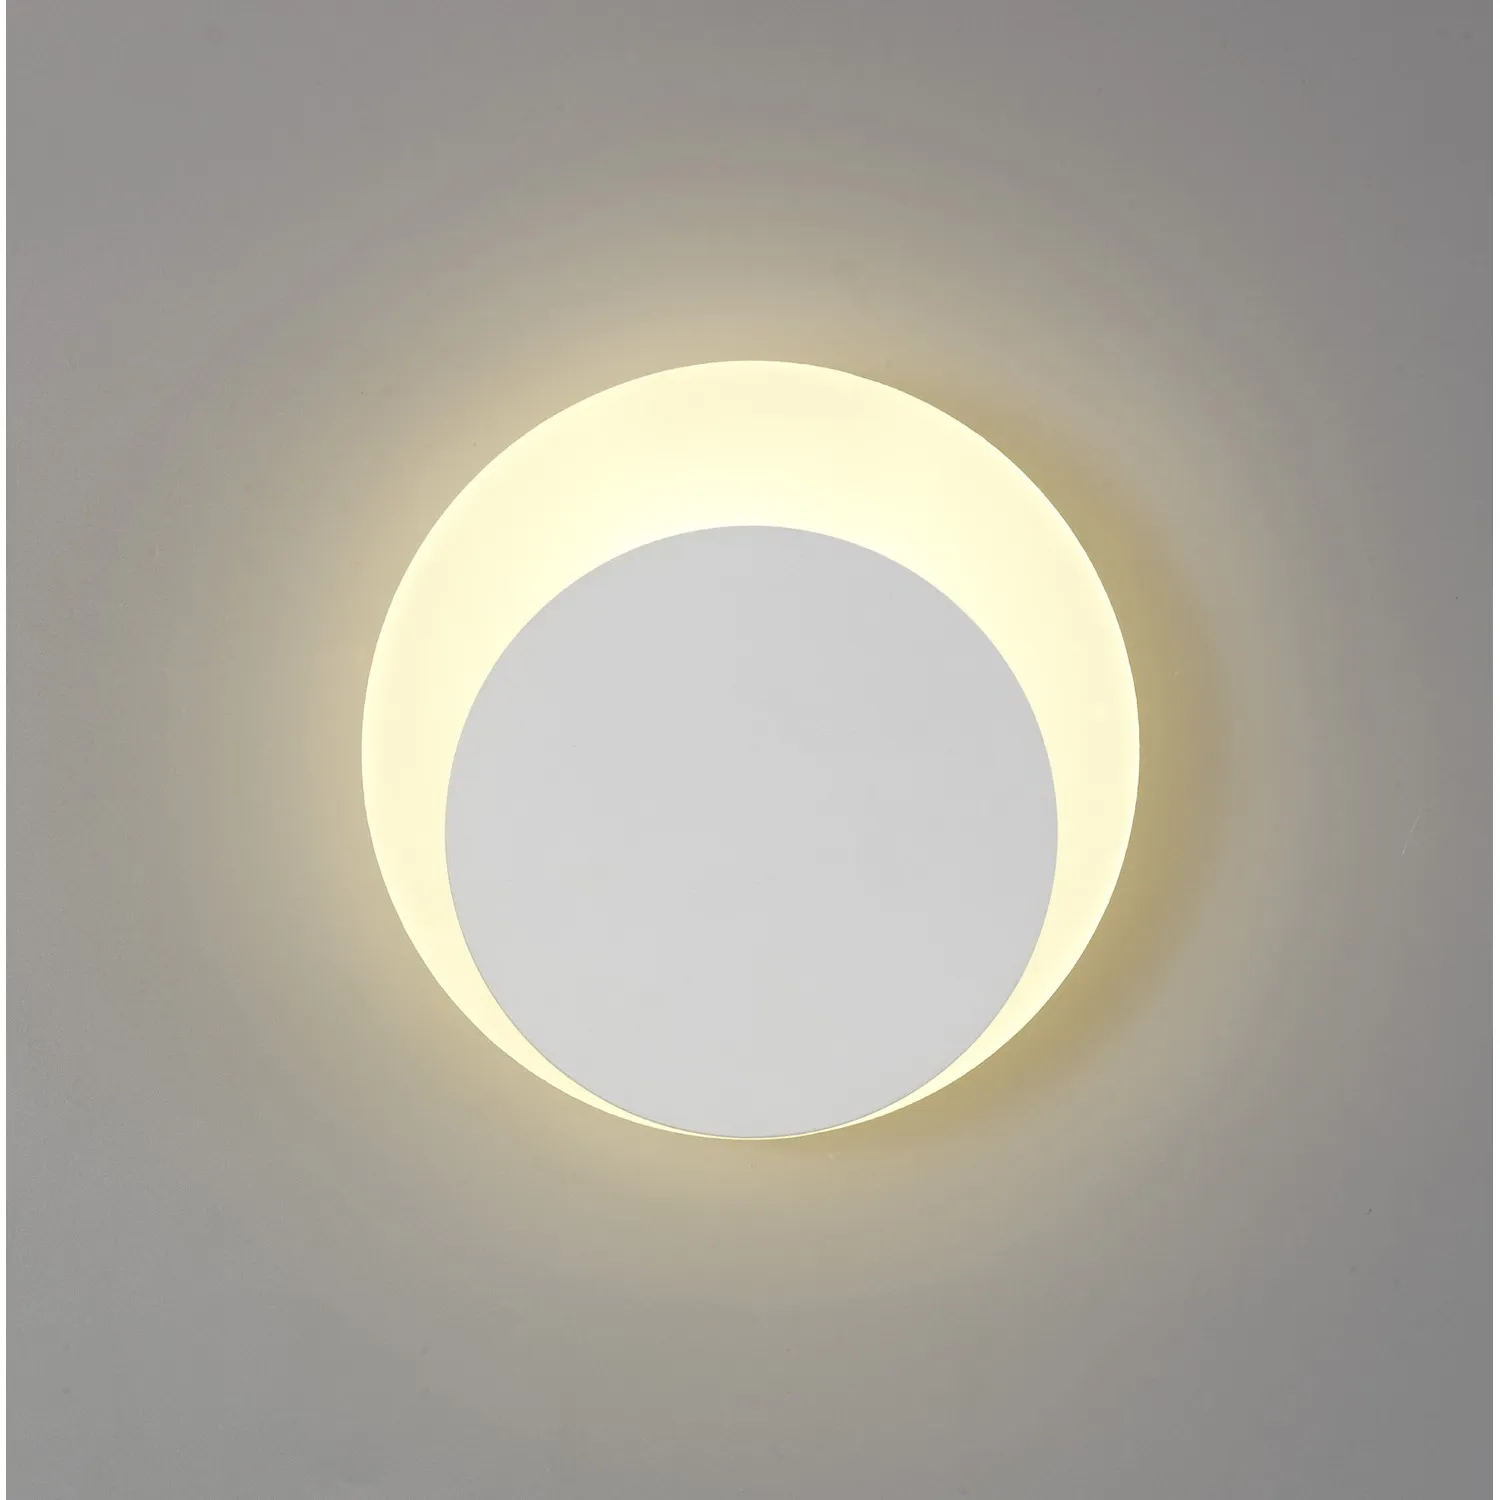 Edgware Magnetic Base Wall Lamp, 12W LED 3000K 498lm, 15 19cm Round Bottom Offset, Sand White Acrylic Frosted Diffuser